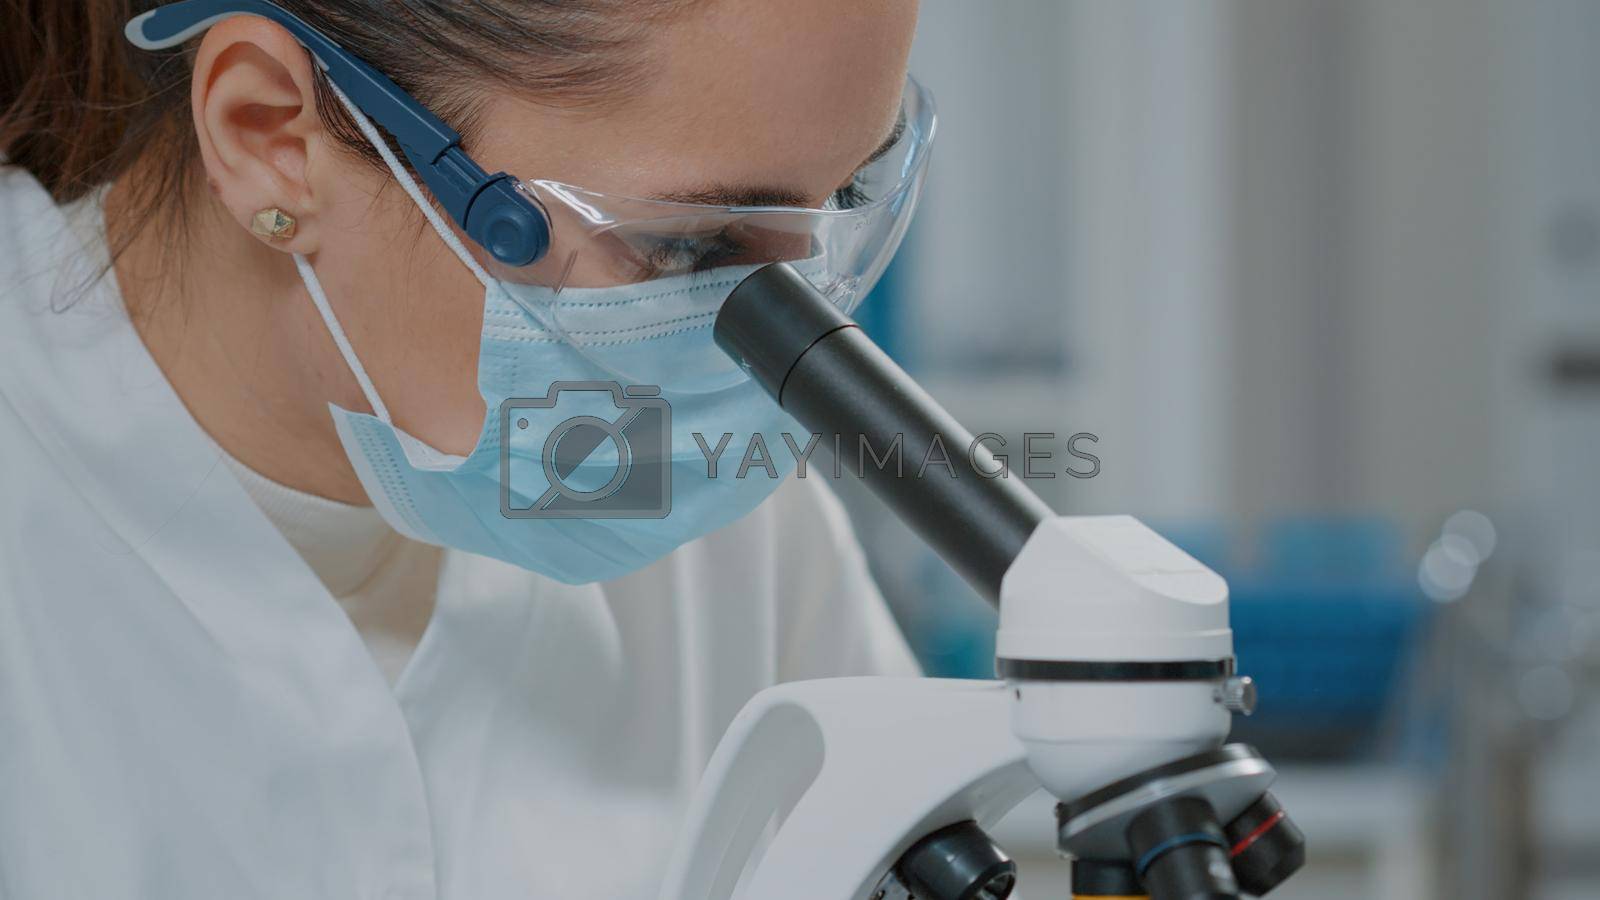 Royalty free image of Specialist analyzing dna on microscope in laboratory by DCStudio